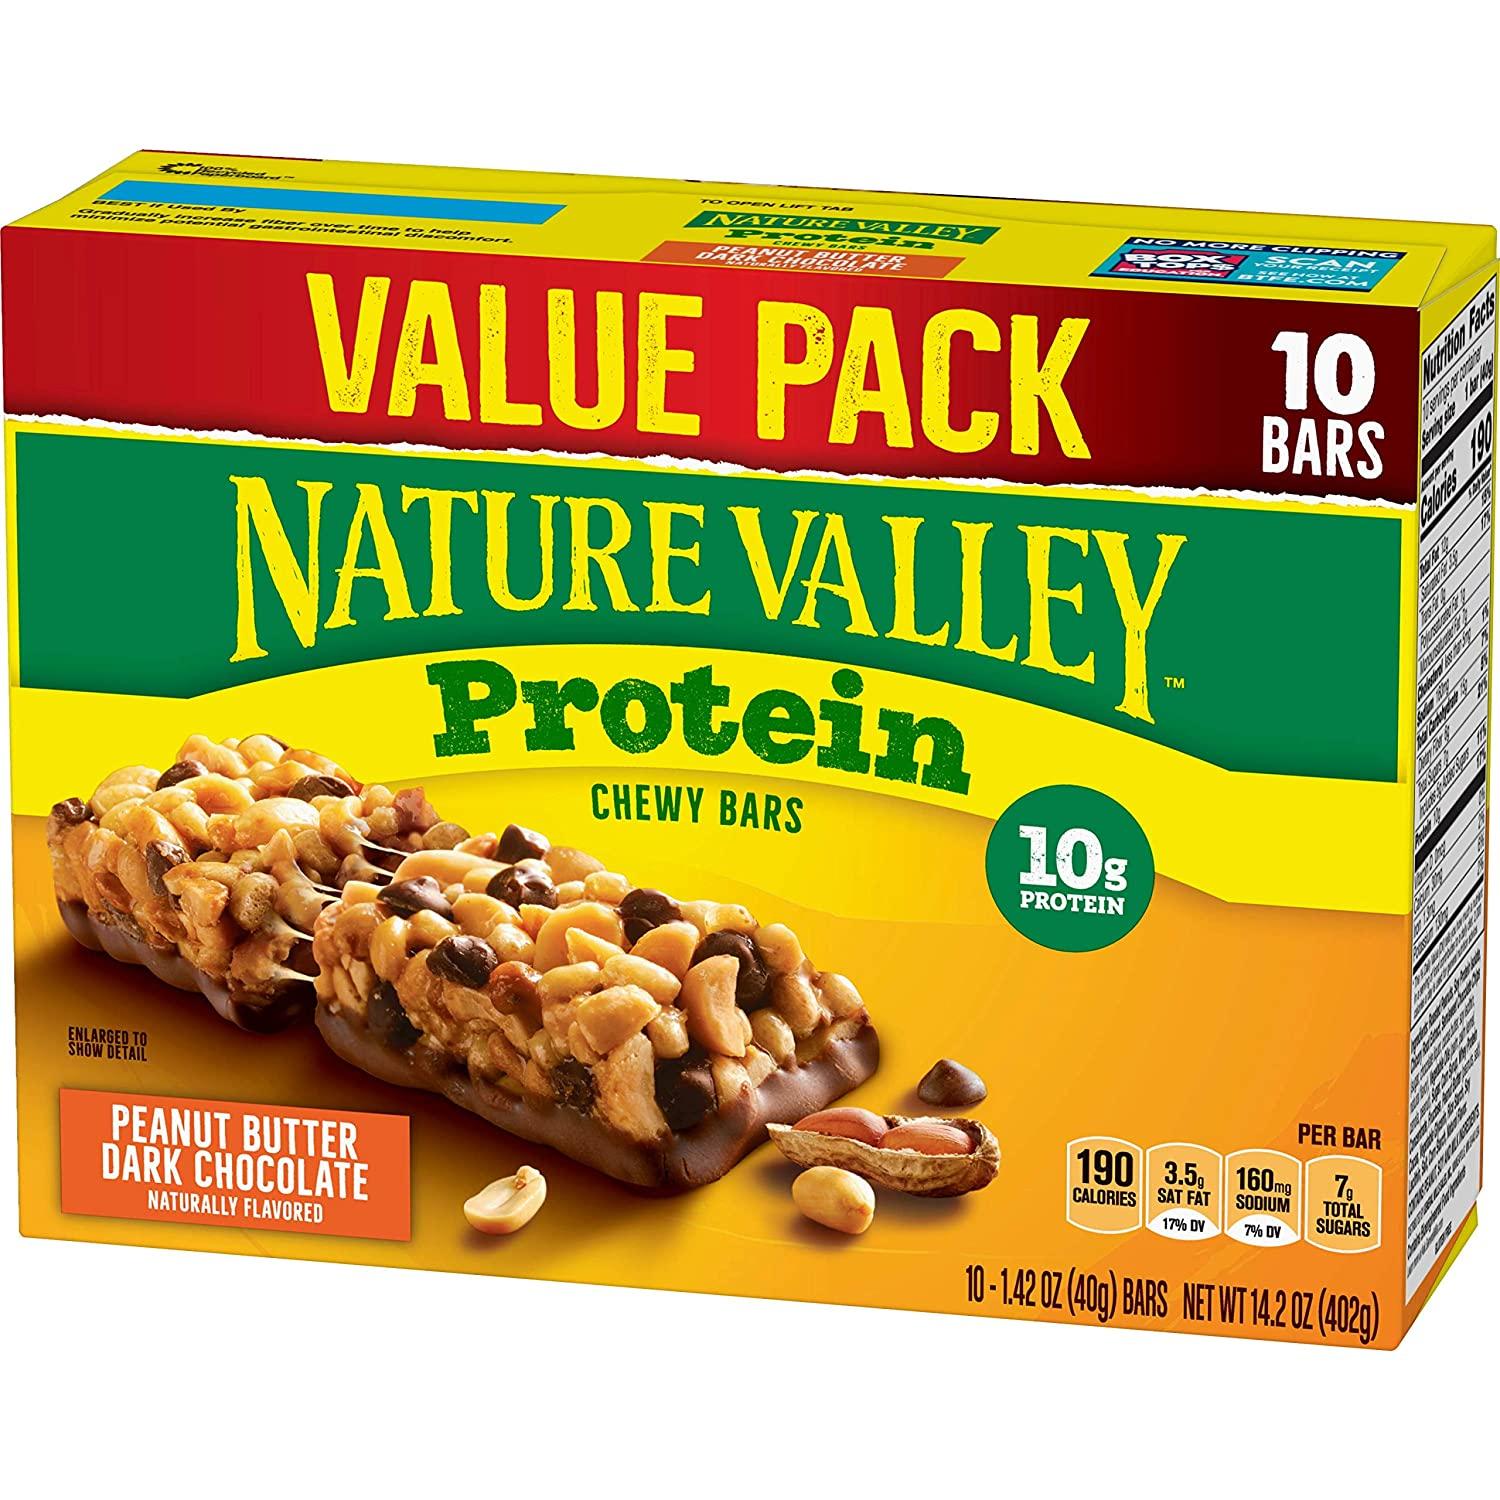 10 Nature Valley Protein Granola Bars for $3.99 Shipped